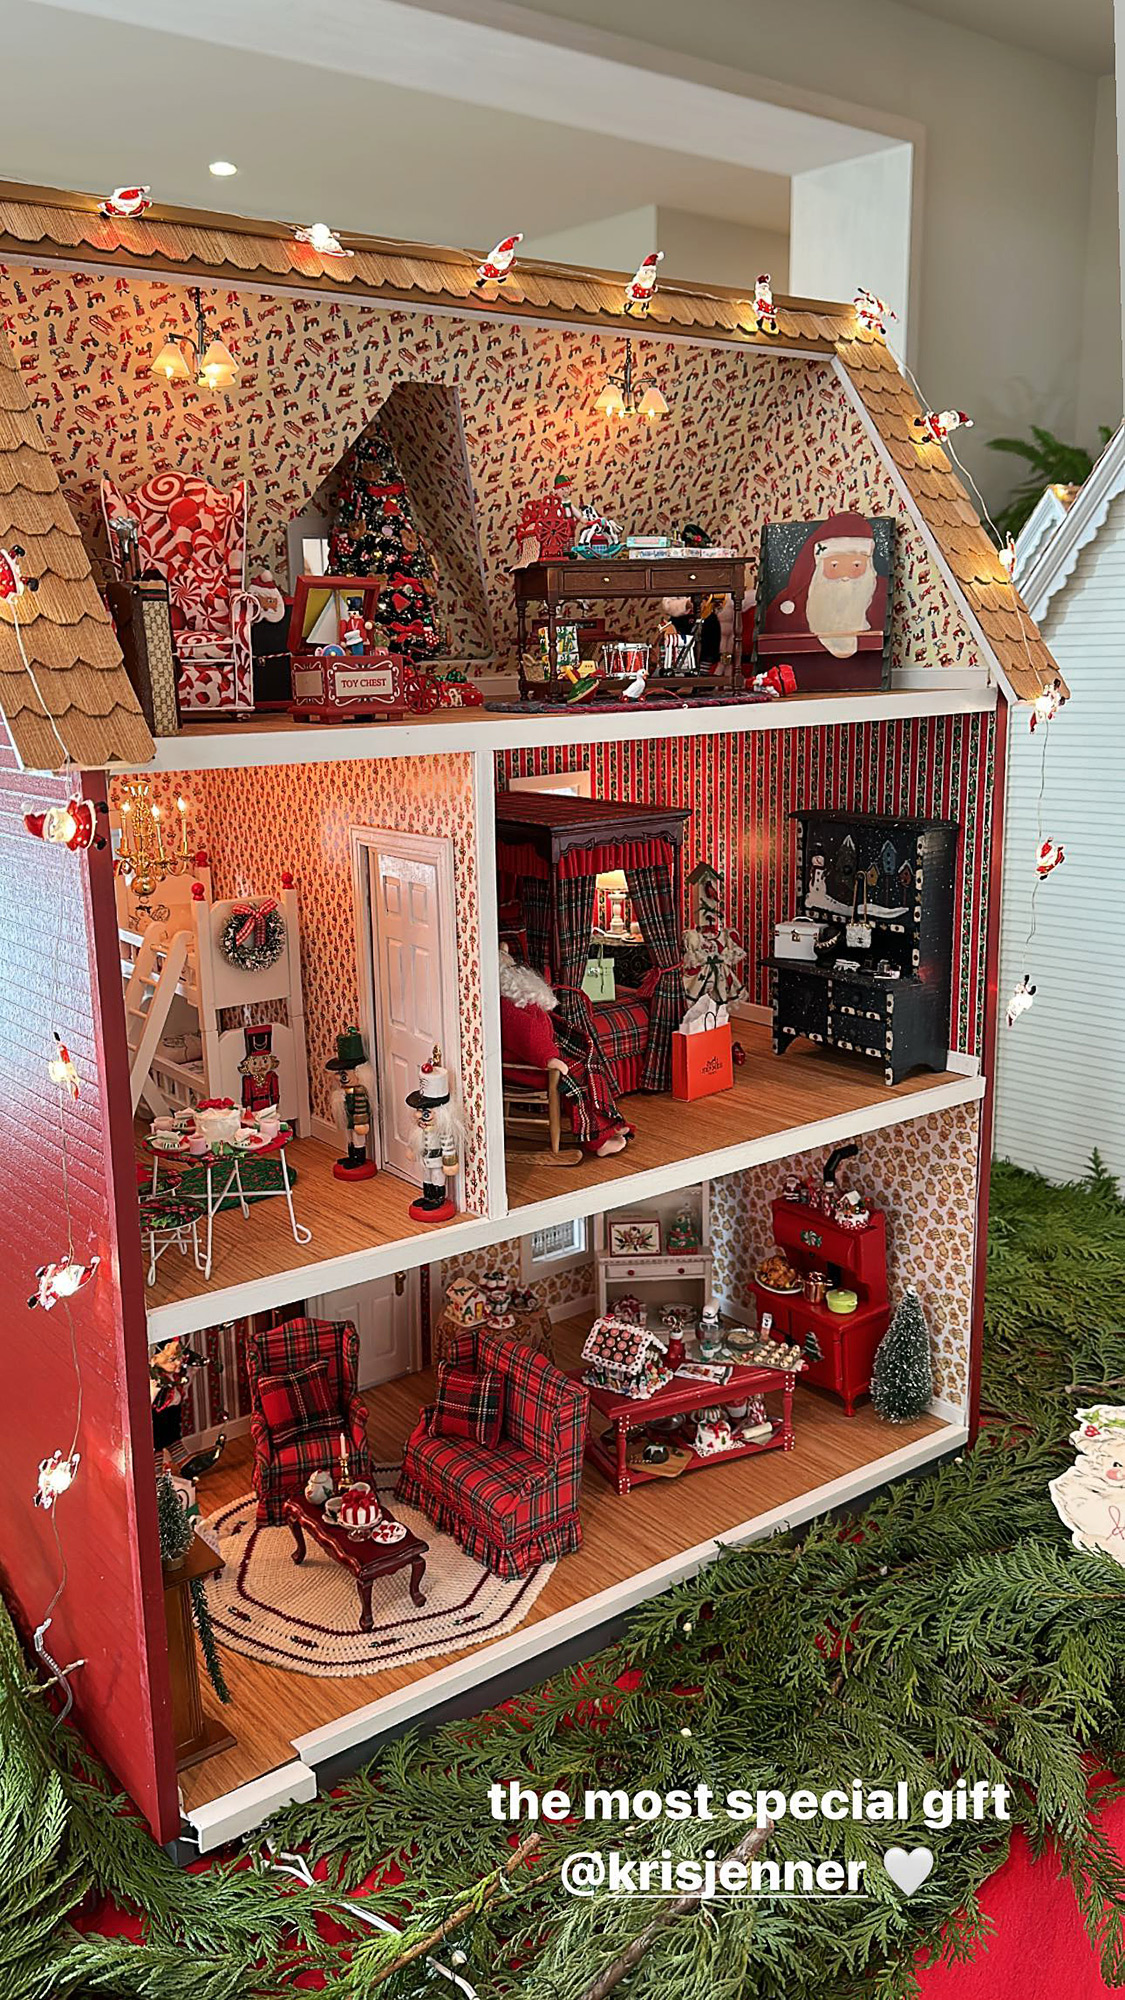 Kylie Jenner Gushes Over 'Special' Christmas Gift From Kris Jenner- See Her Dollhouse - 305